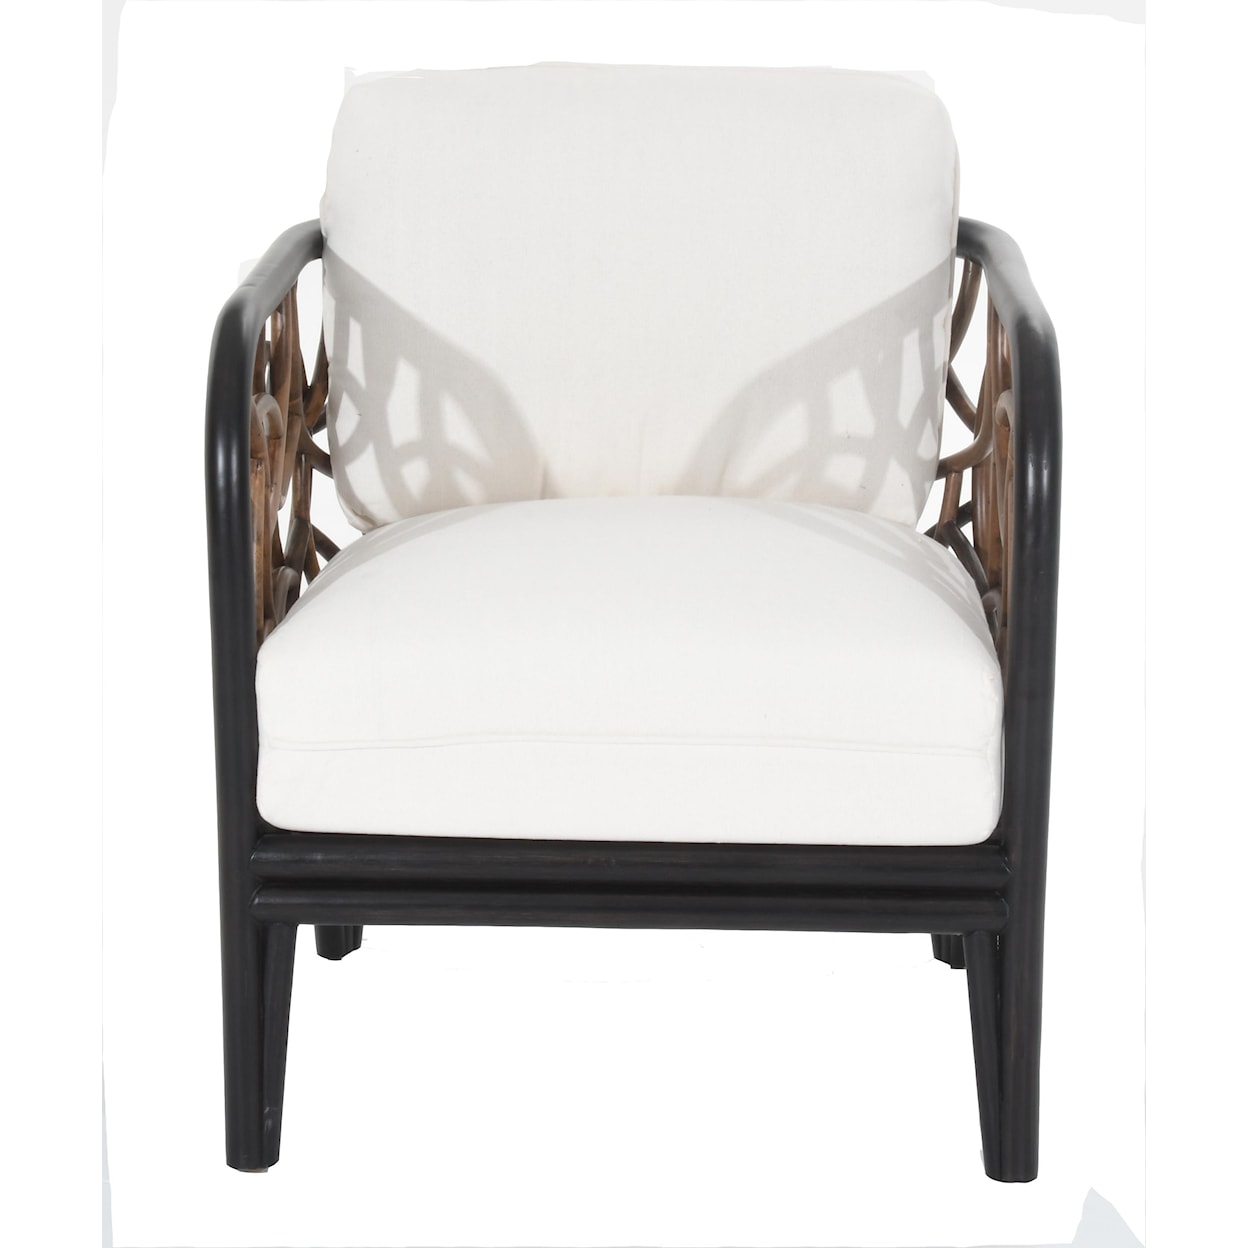 Pelican Reef Trinidad Lounge Chair with Cushion